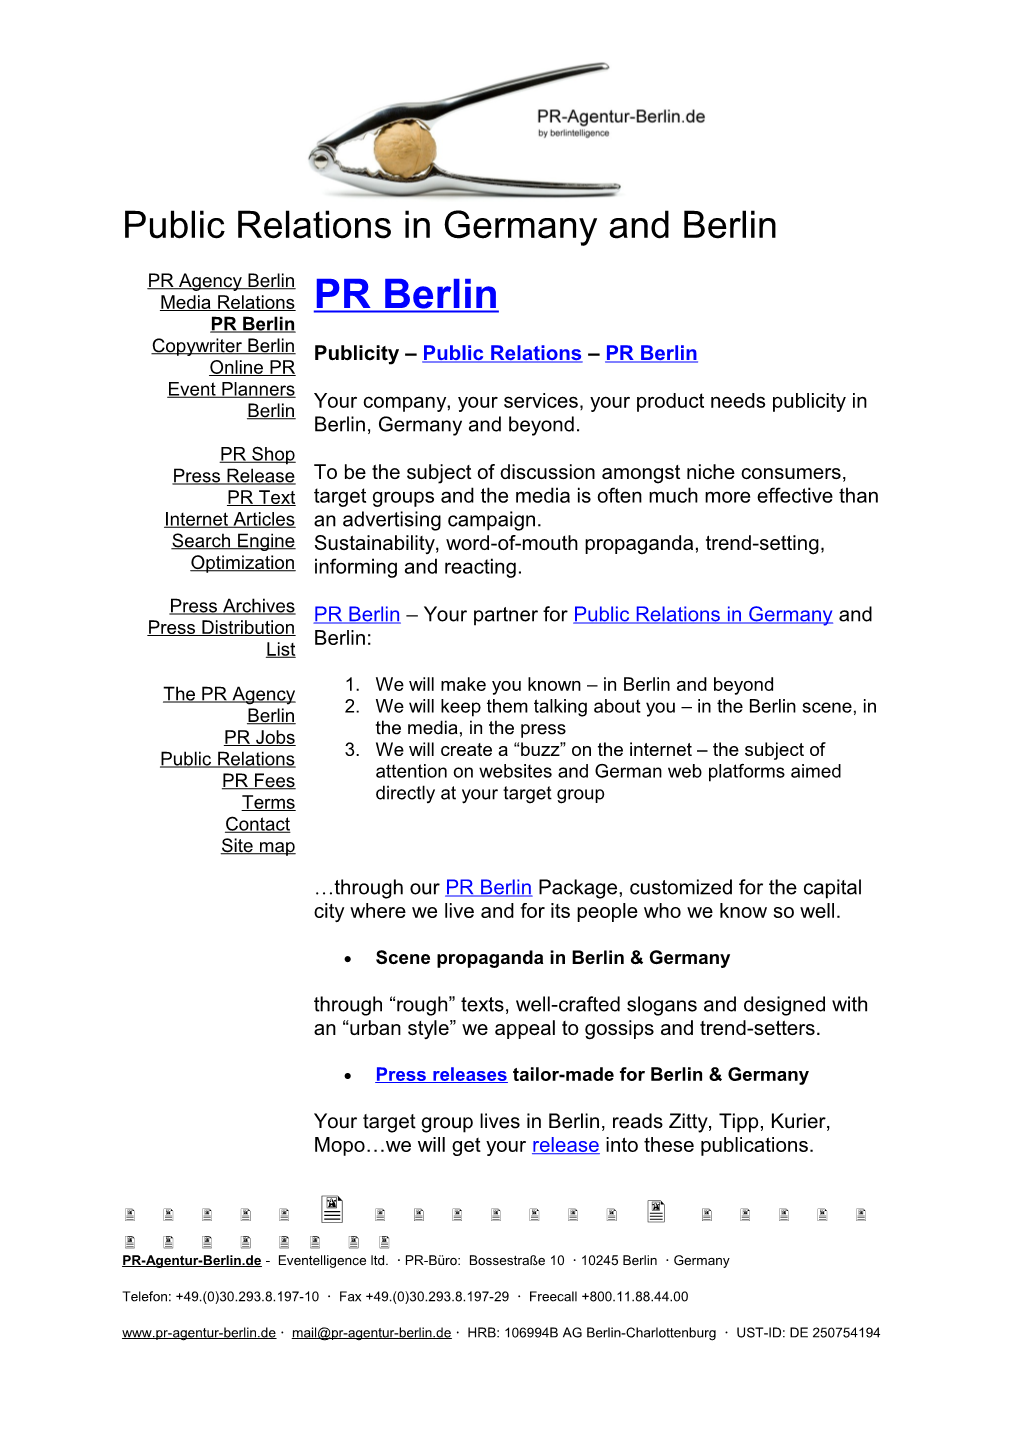 Public Relations in Germany and Berlin